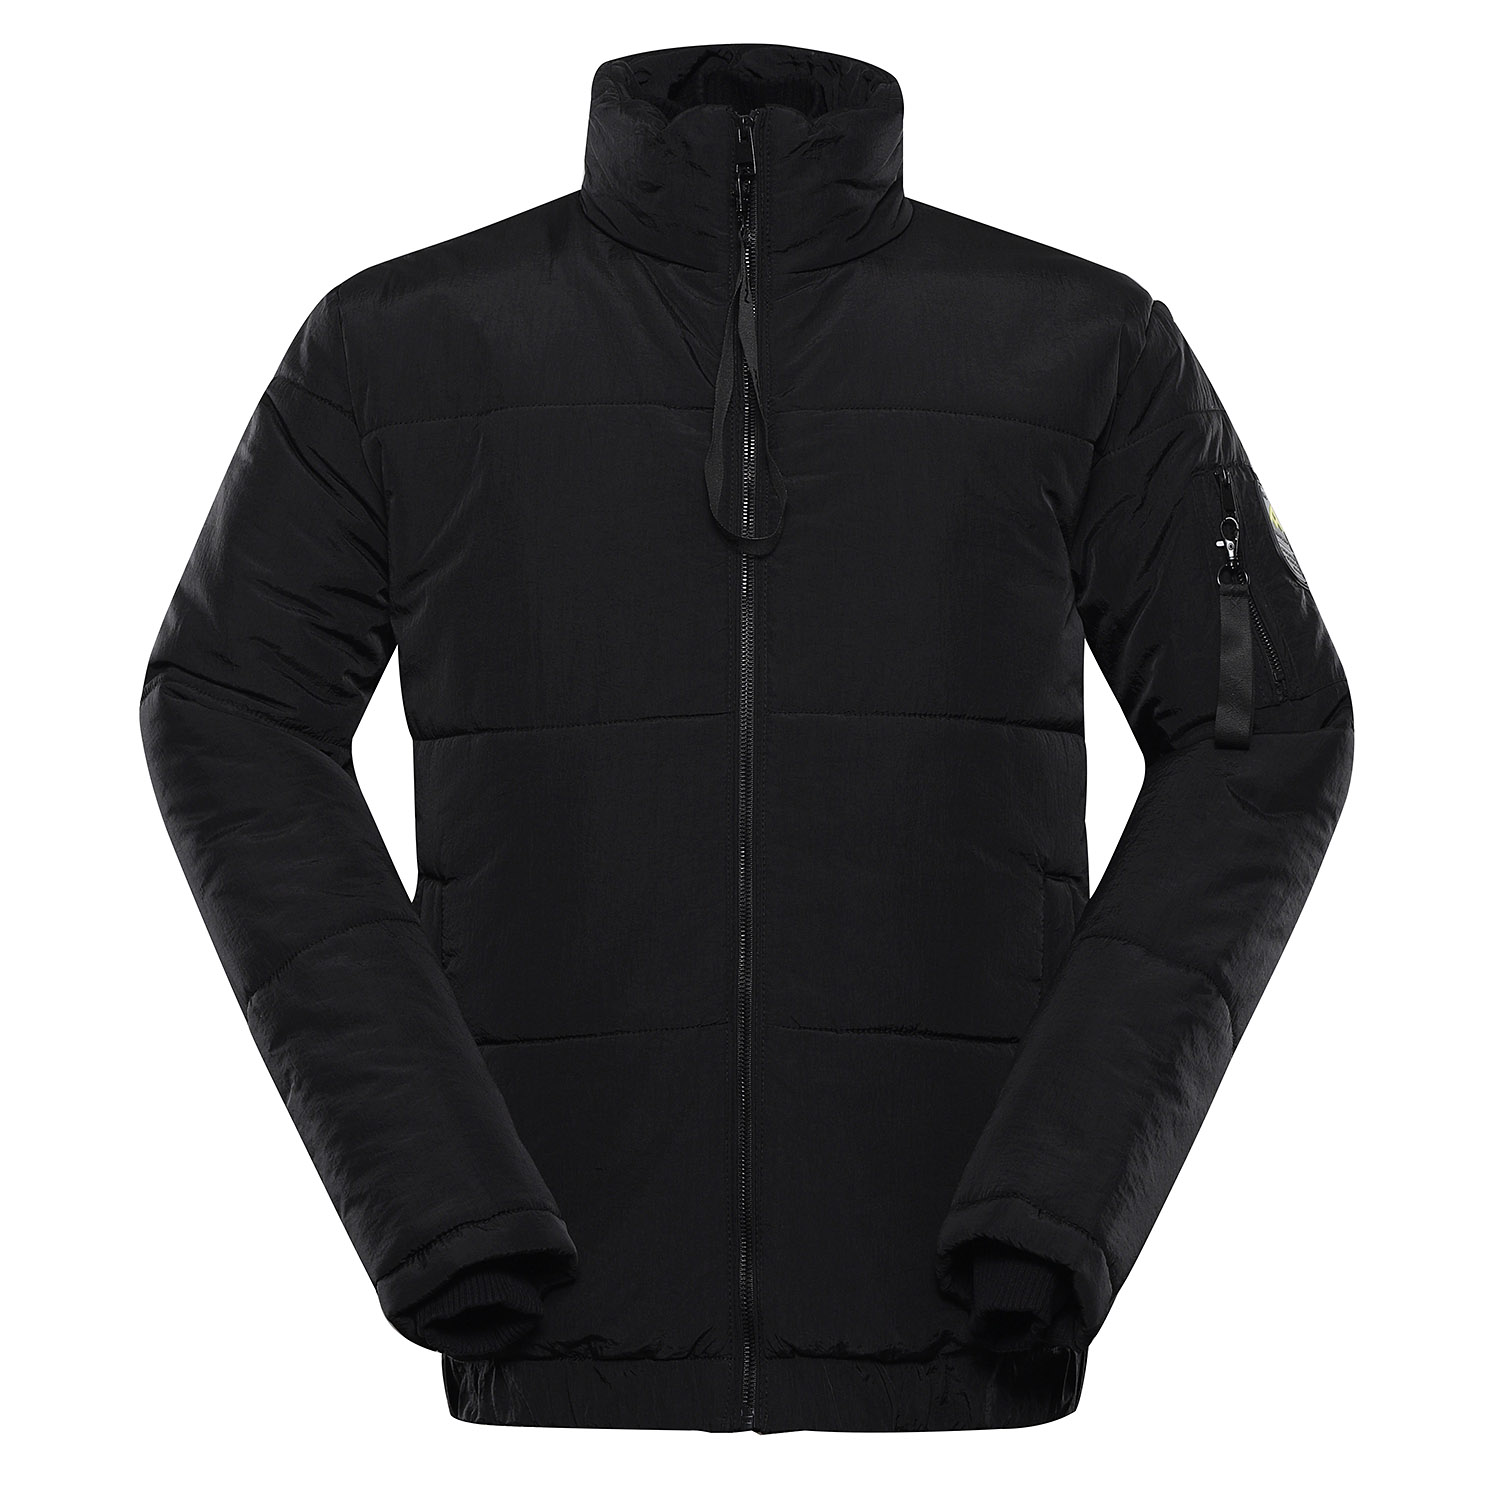 Men's quilted jacket nax NAX MABOR black